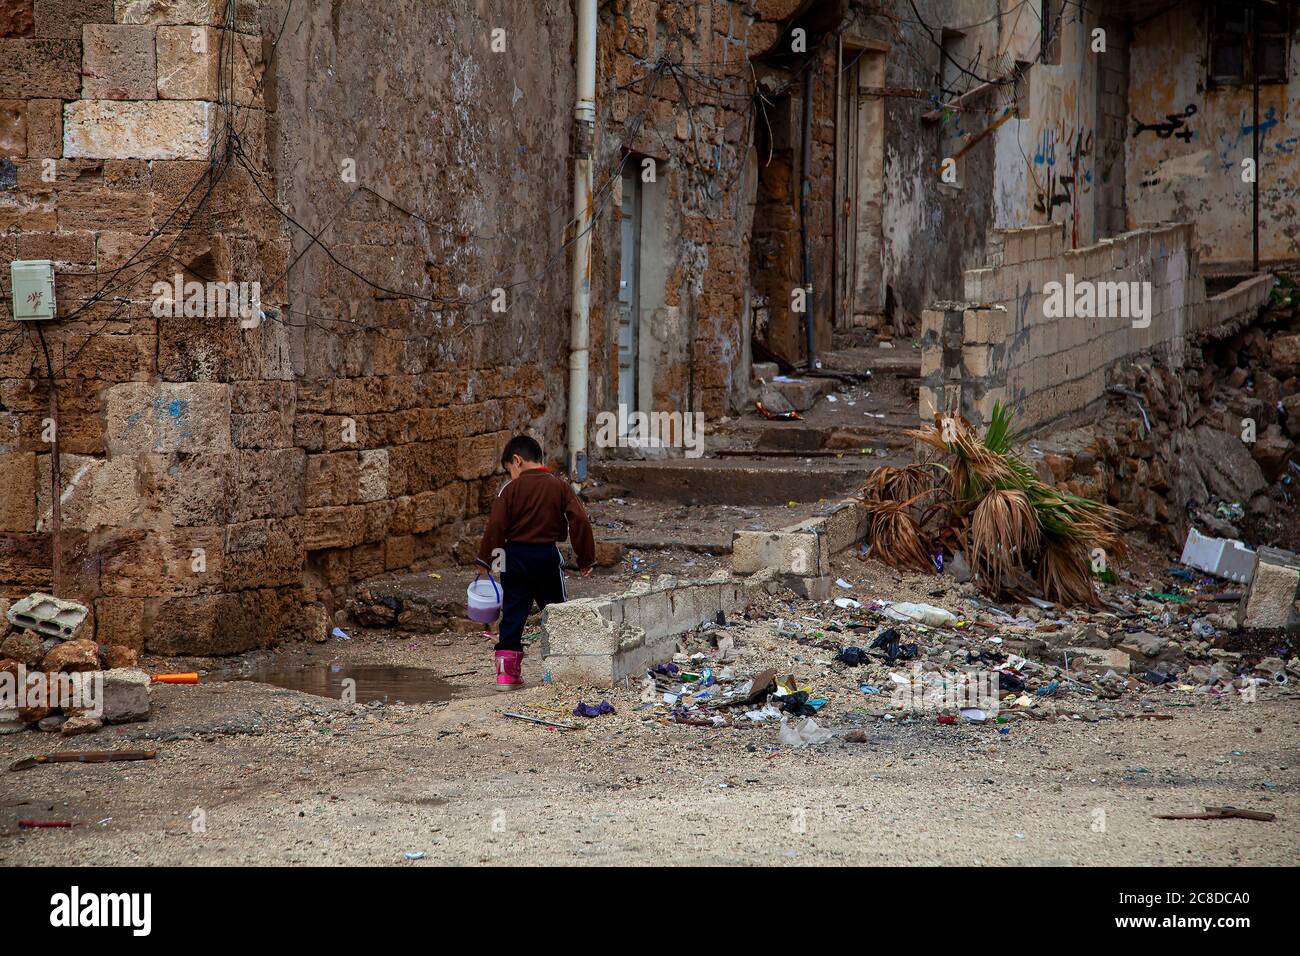 A scene from the back street slums of Tartus, Syria. It is a rundown dirty neighborhood with ruble and trash on the abandoned streets and ruined house Stock Photo